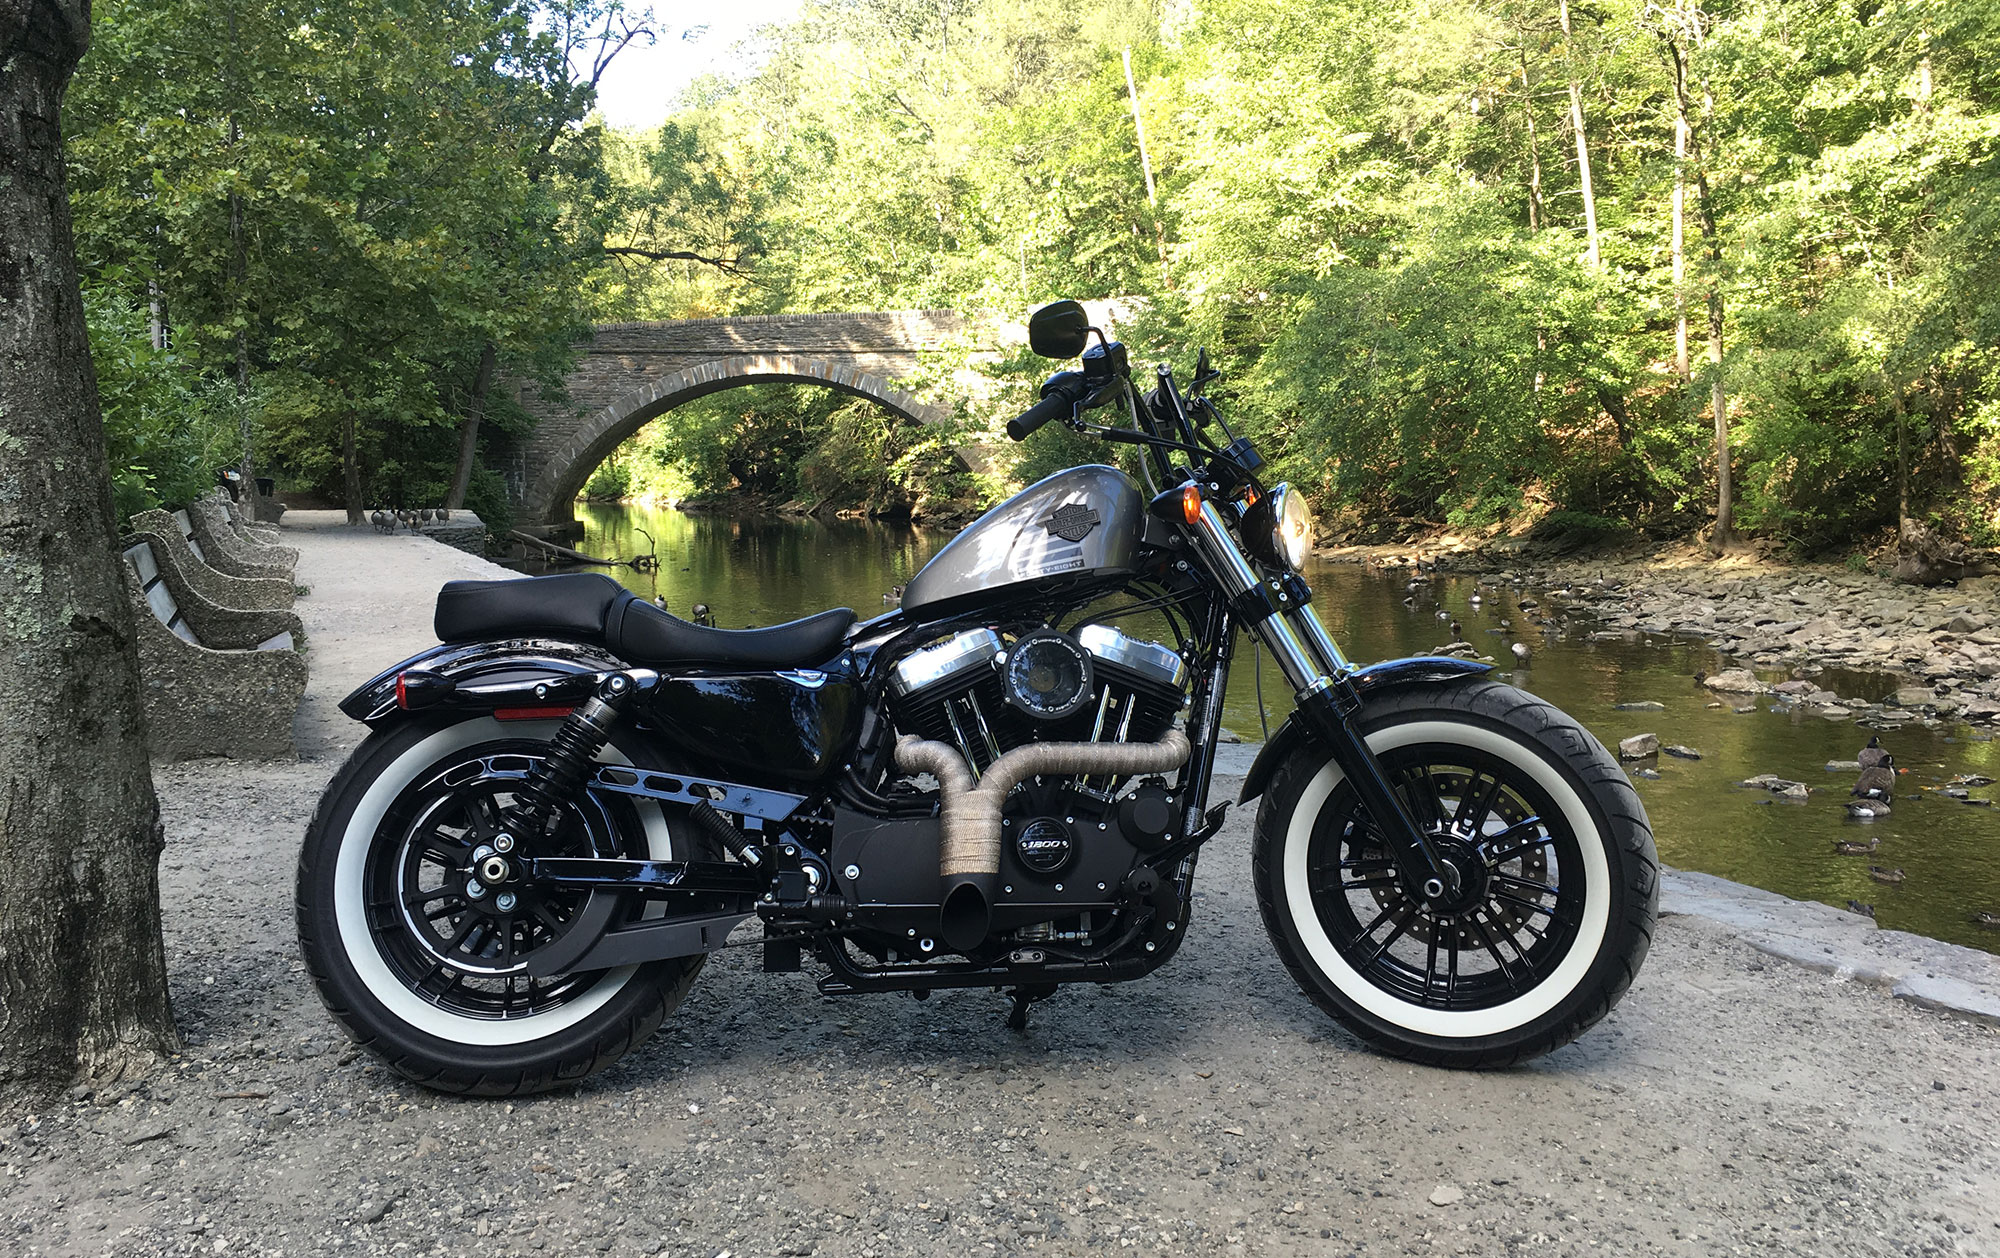 Harley Forty Eight Modifications For Performance Comfort And Style Get Lowered Cycles